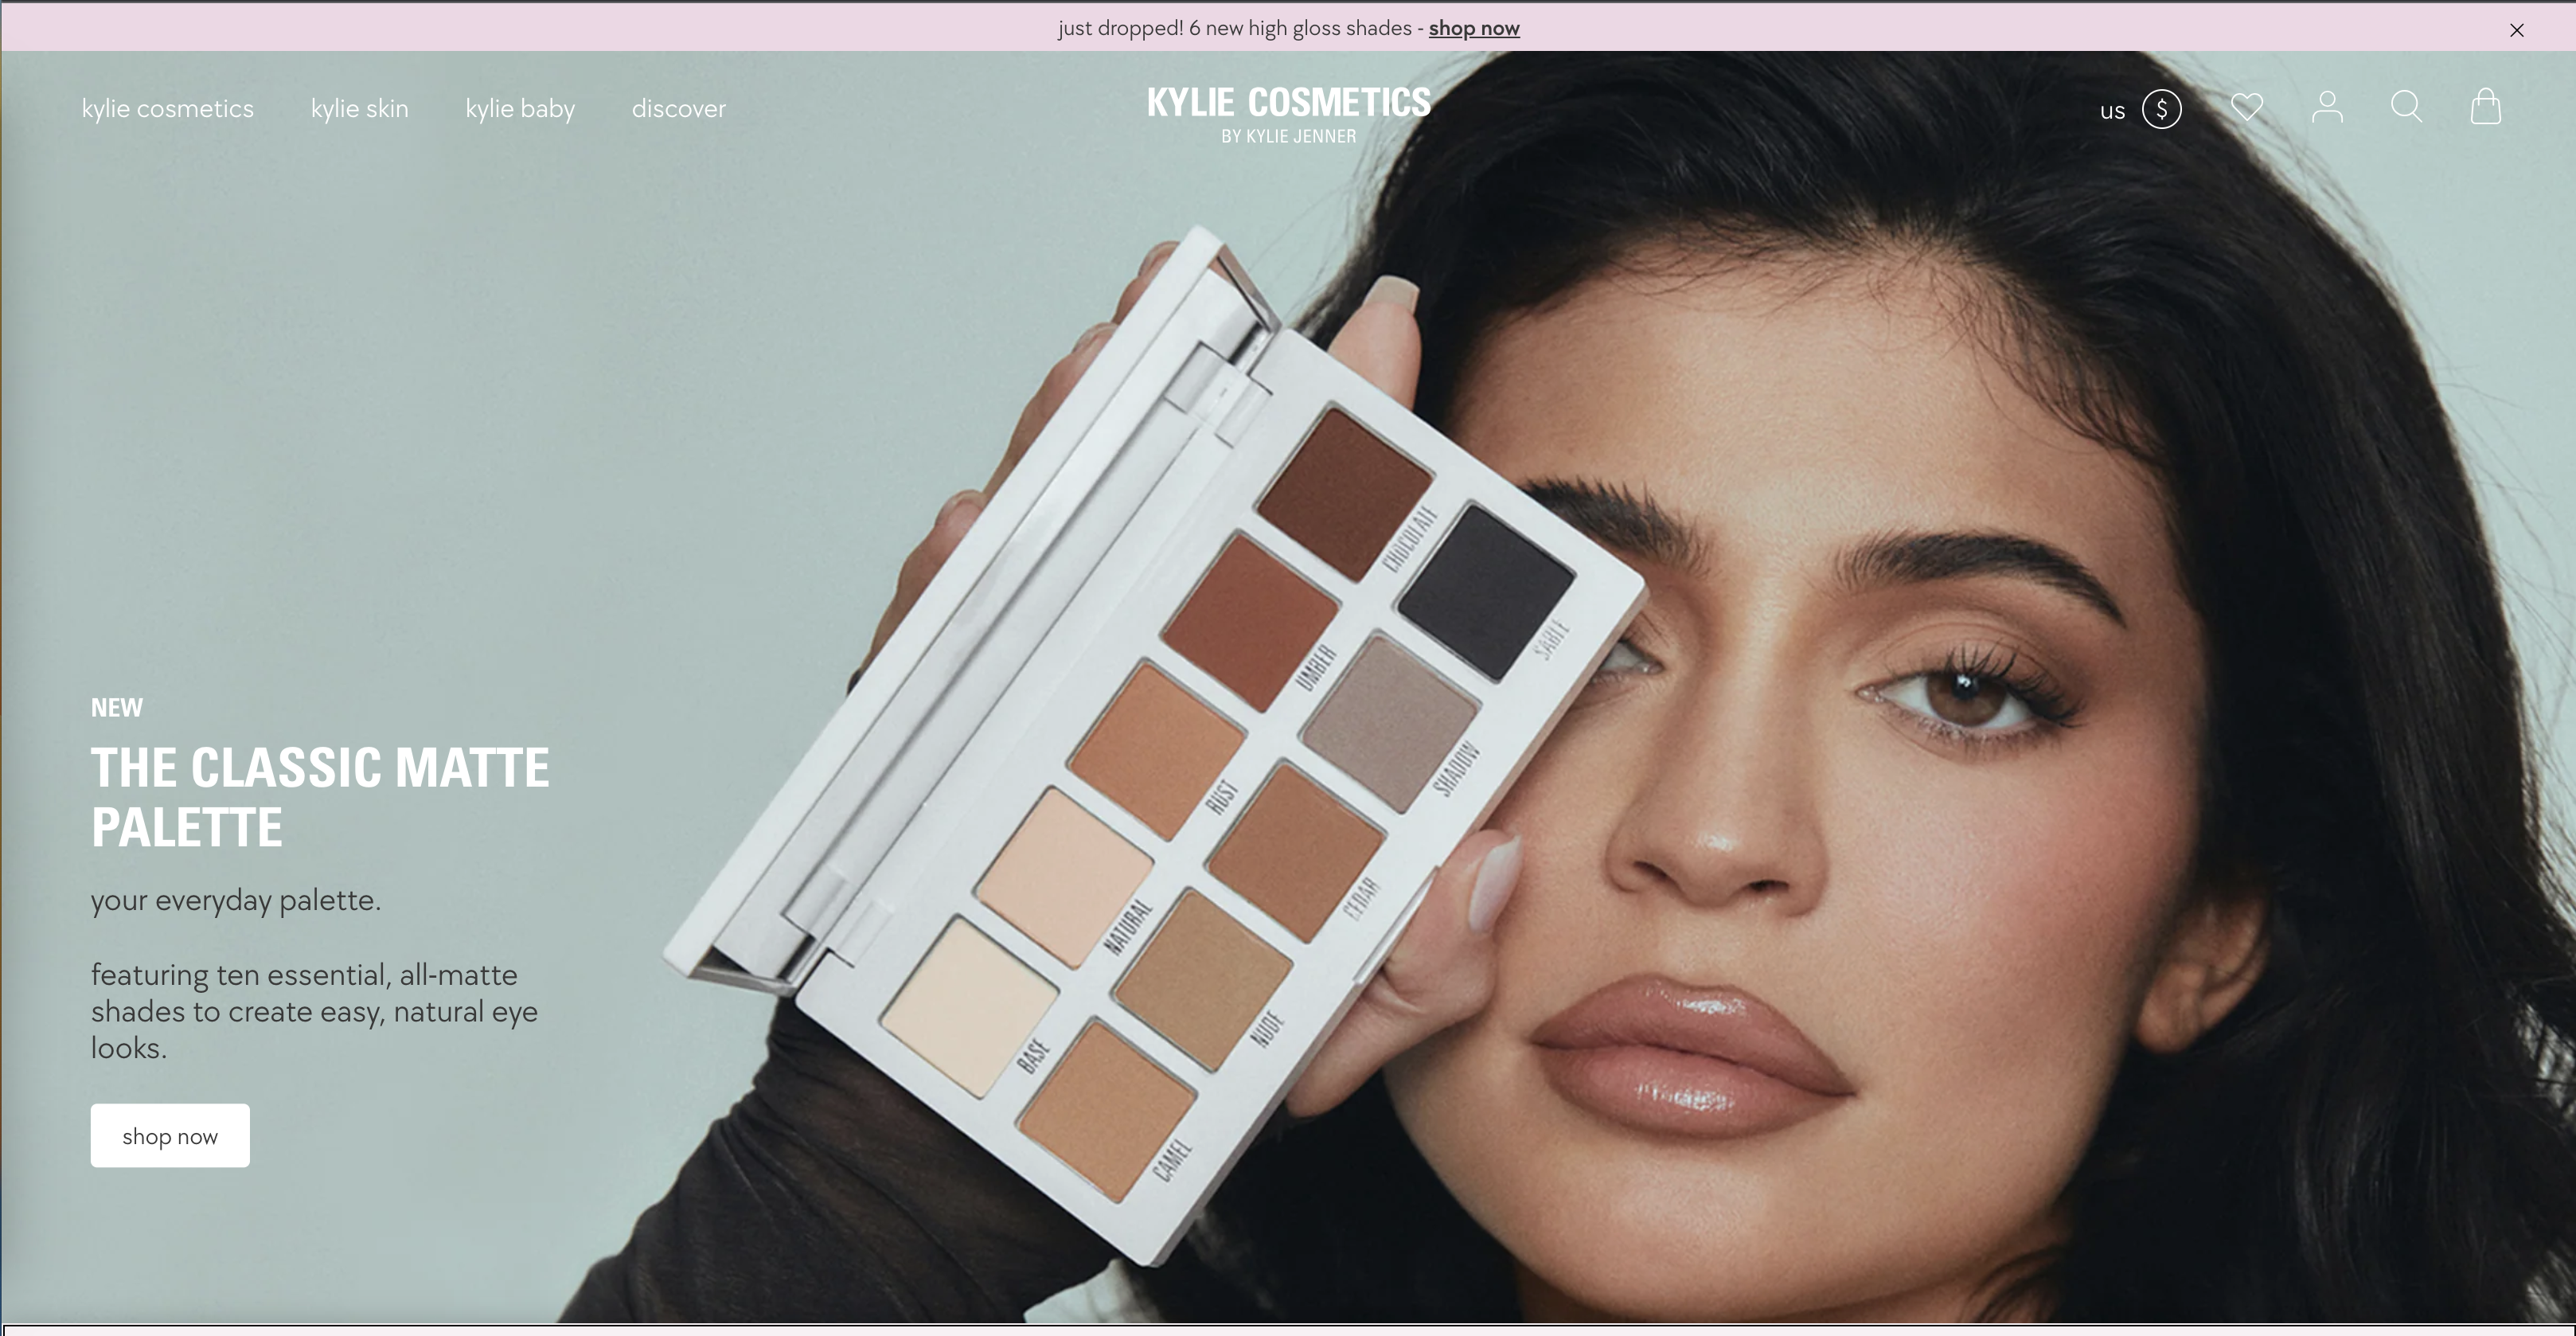 Kylie Cosmetics is hosted on Shopify